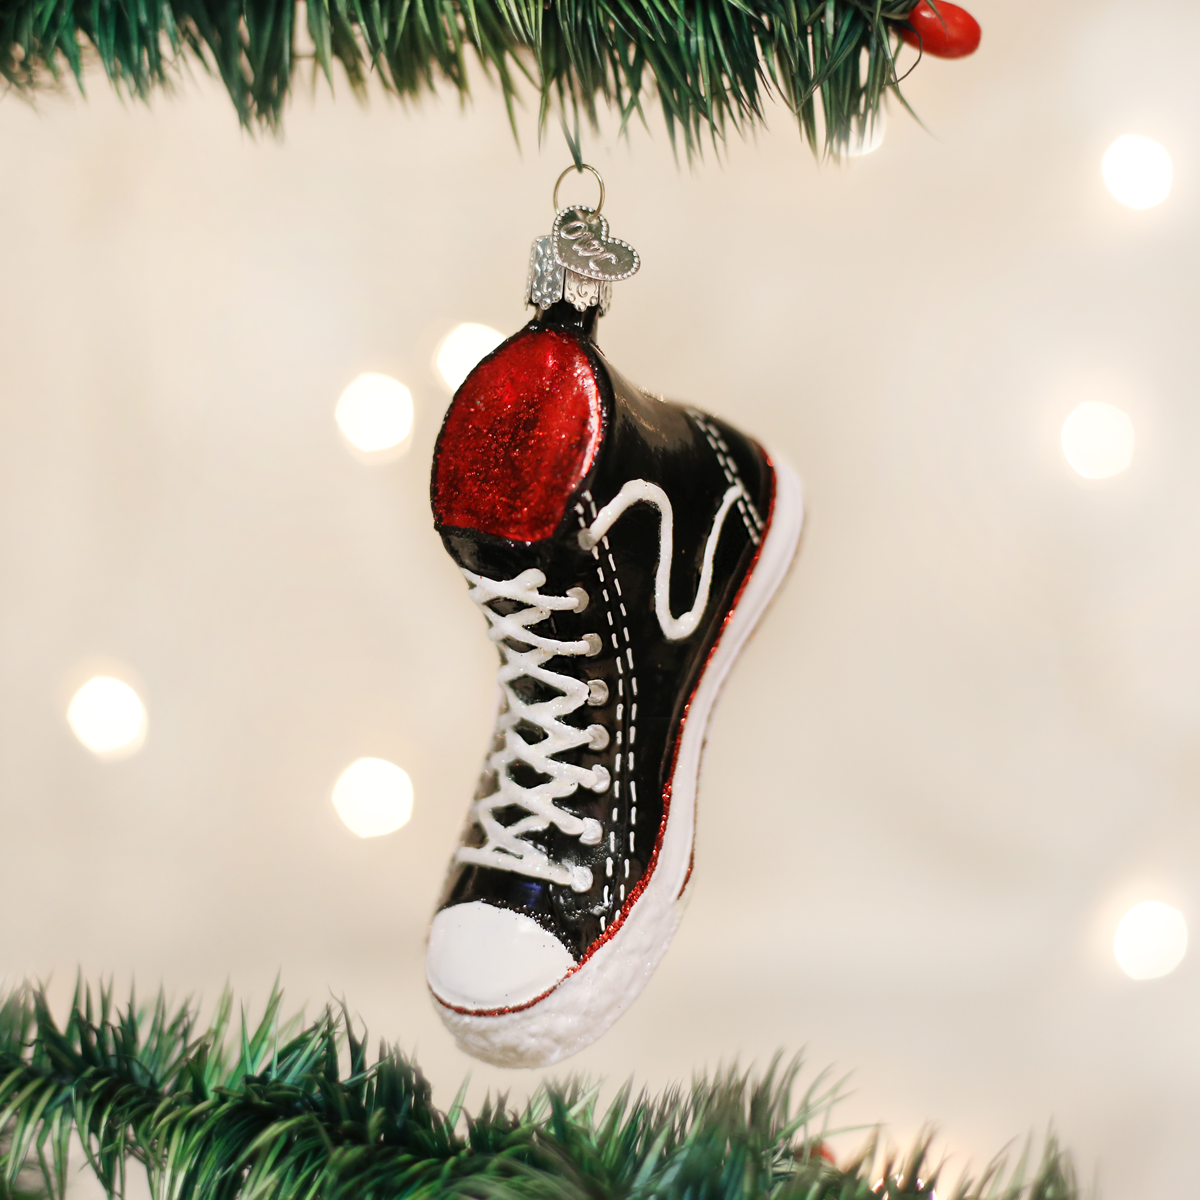 Old World Christmas - High Top Sneaker Ornament    